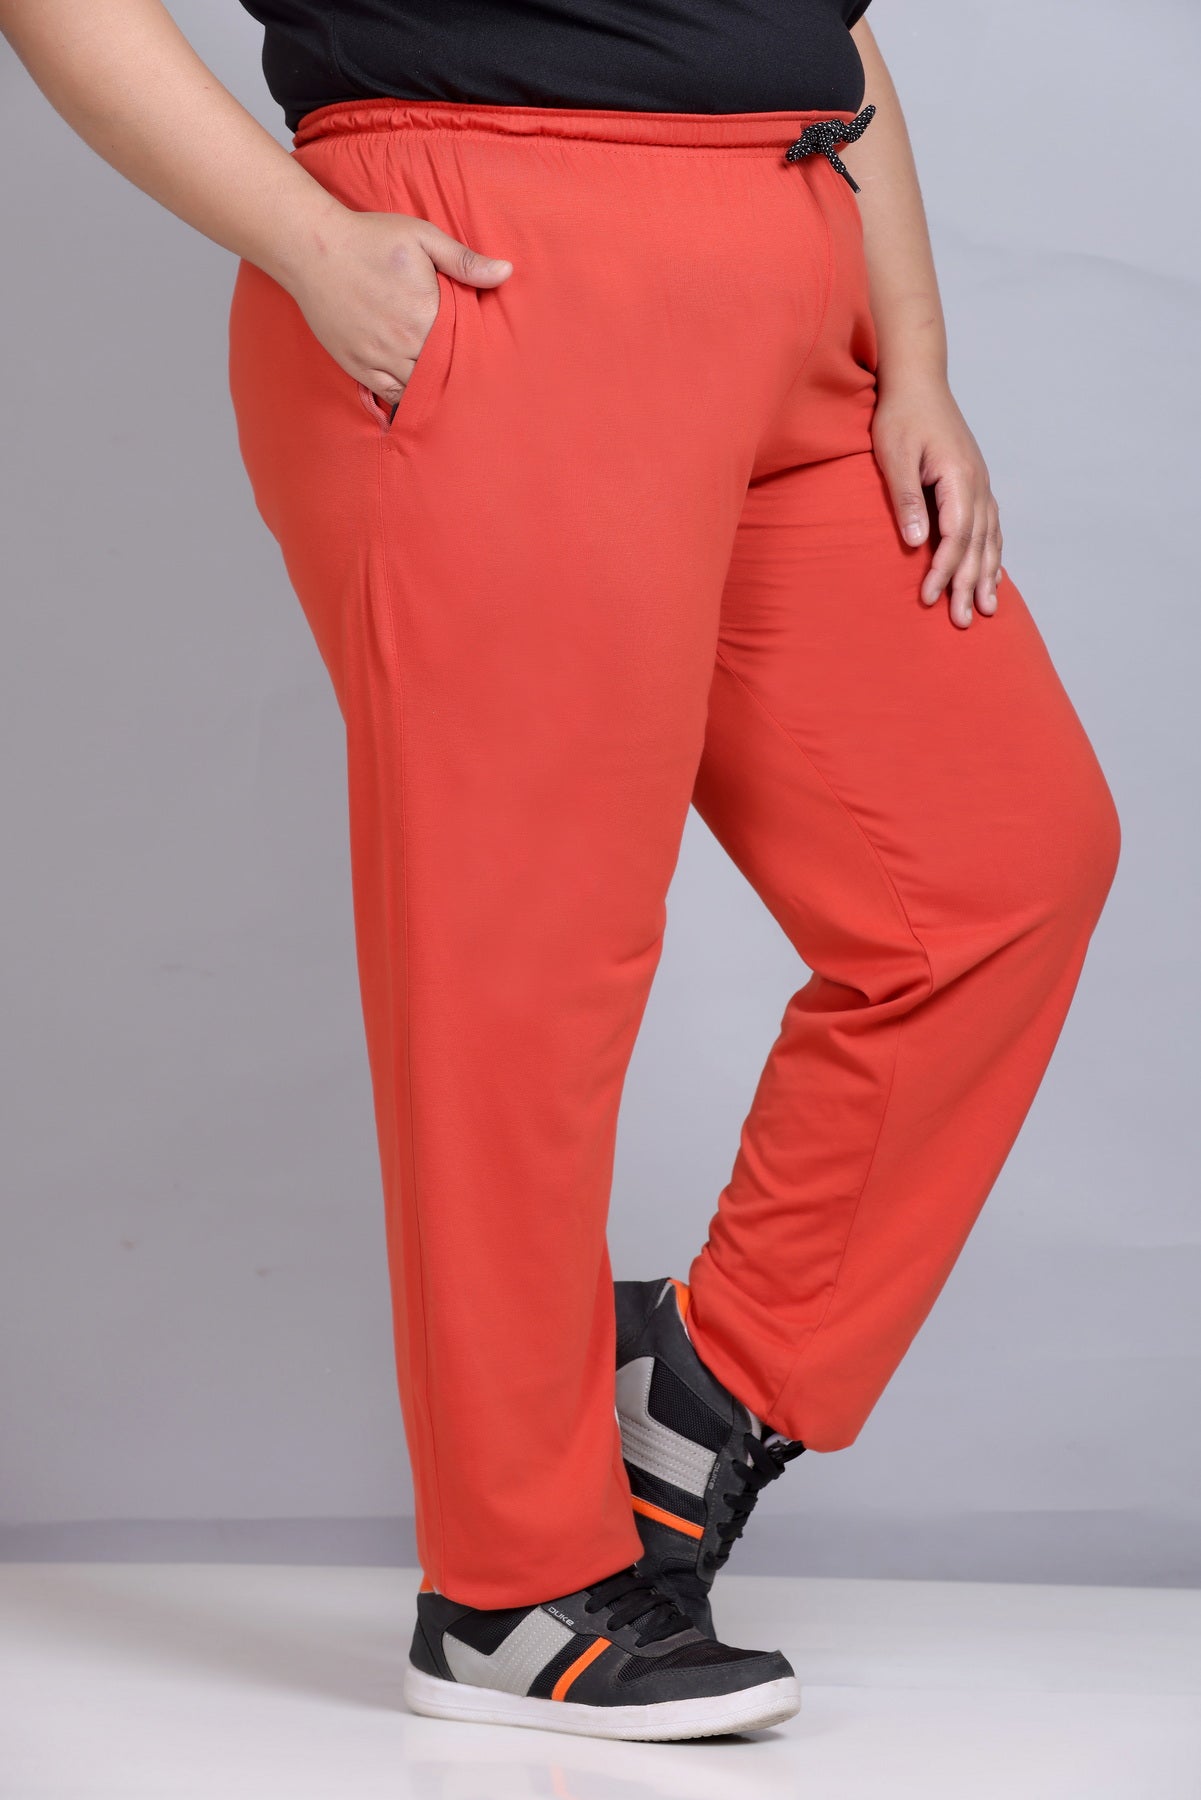 Stylish Orange Cotton Track Pants For Women Online In India